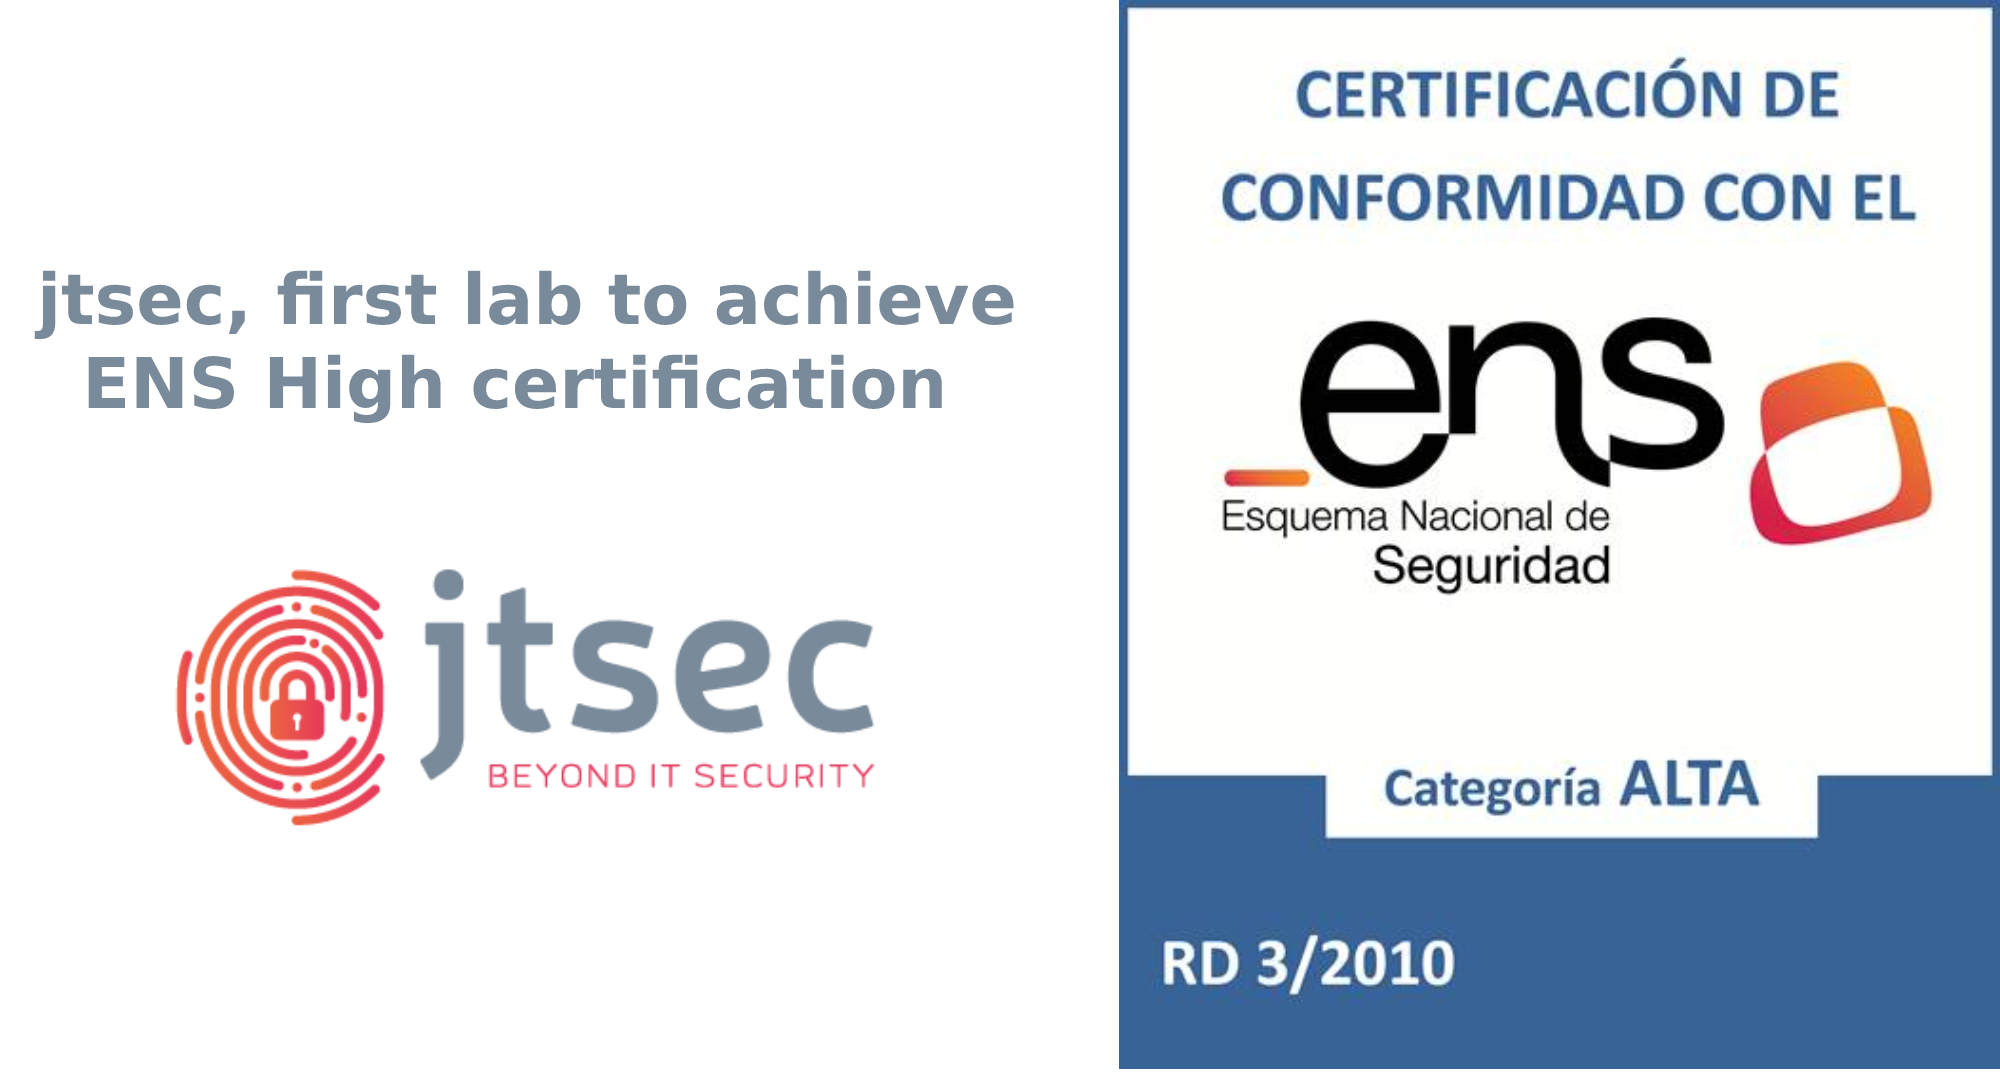 jtsec achieves ENS High Certification.